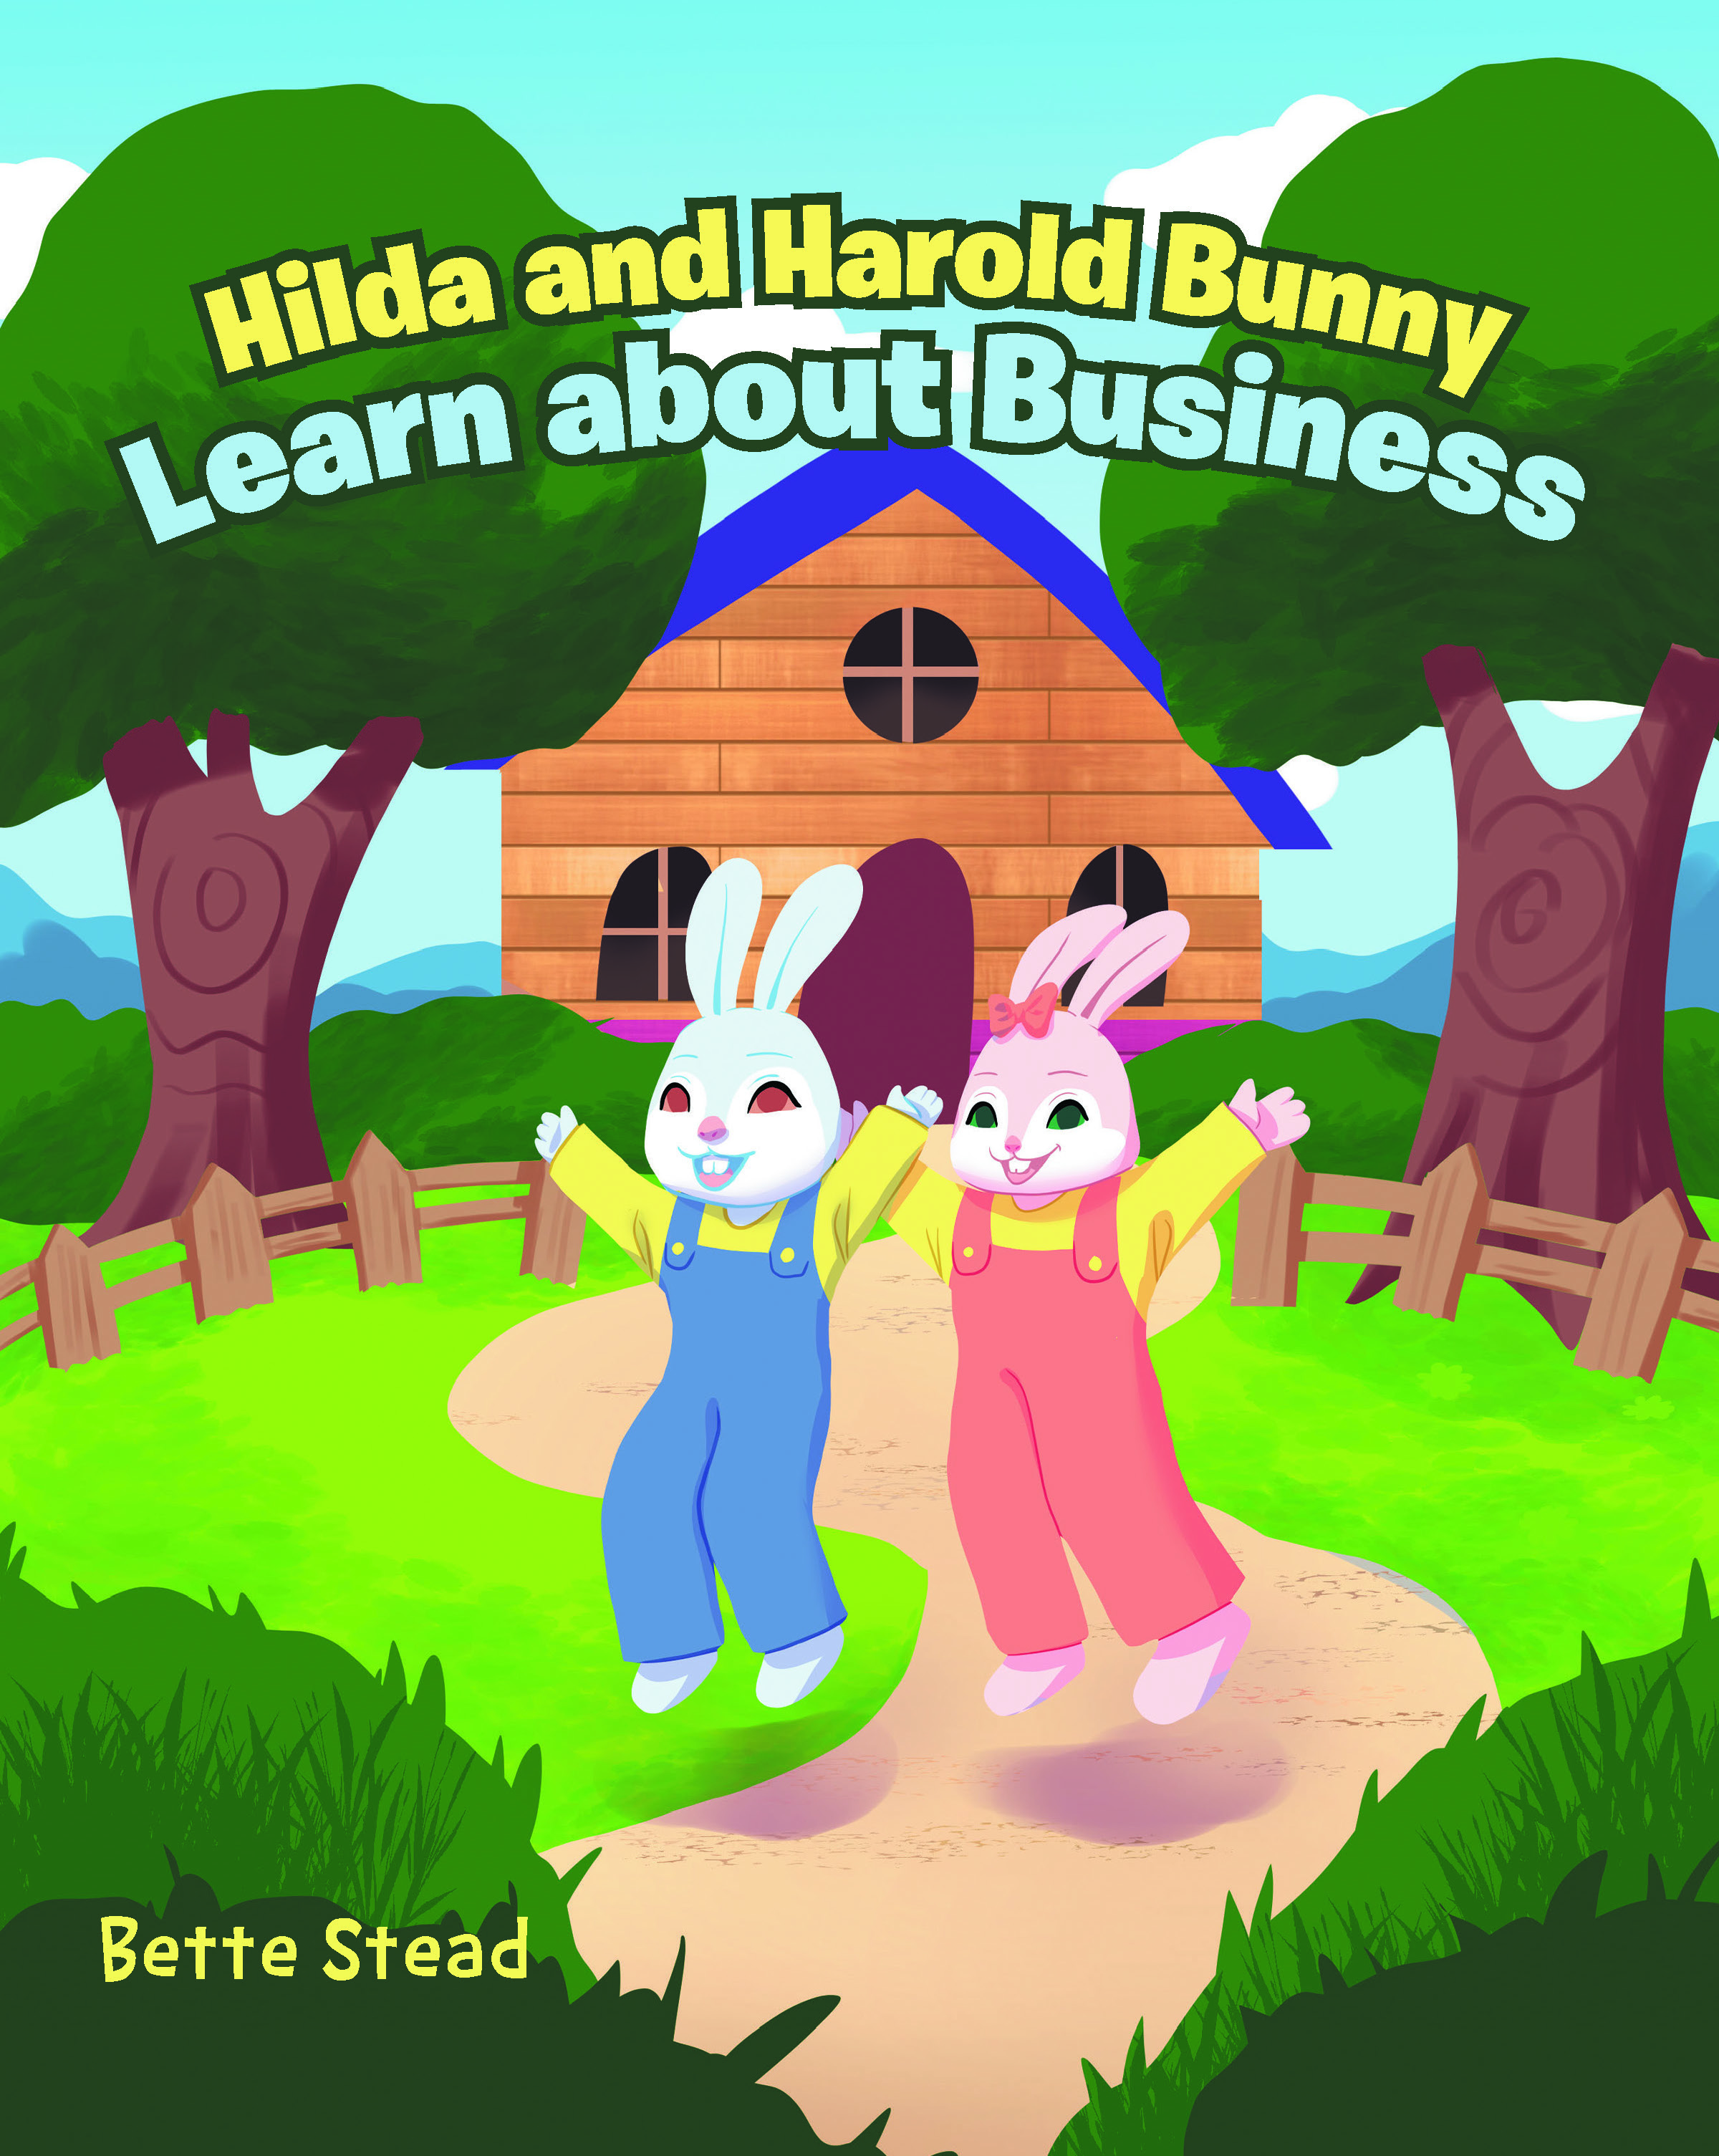 Author Bette Stead’s New Book, "Hilda and Harold Bunny Learn About Business," Follows Two Bunnies Who Must Use Their Receipt to Prove They Didn’t Steal from the Store